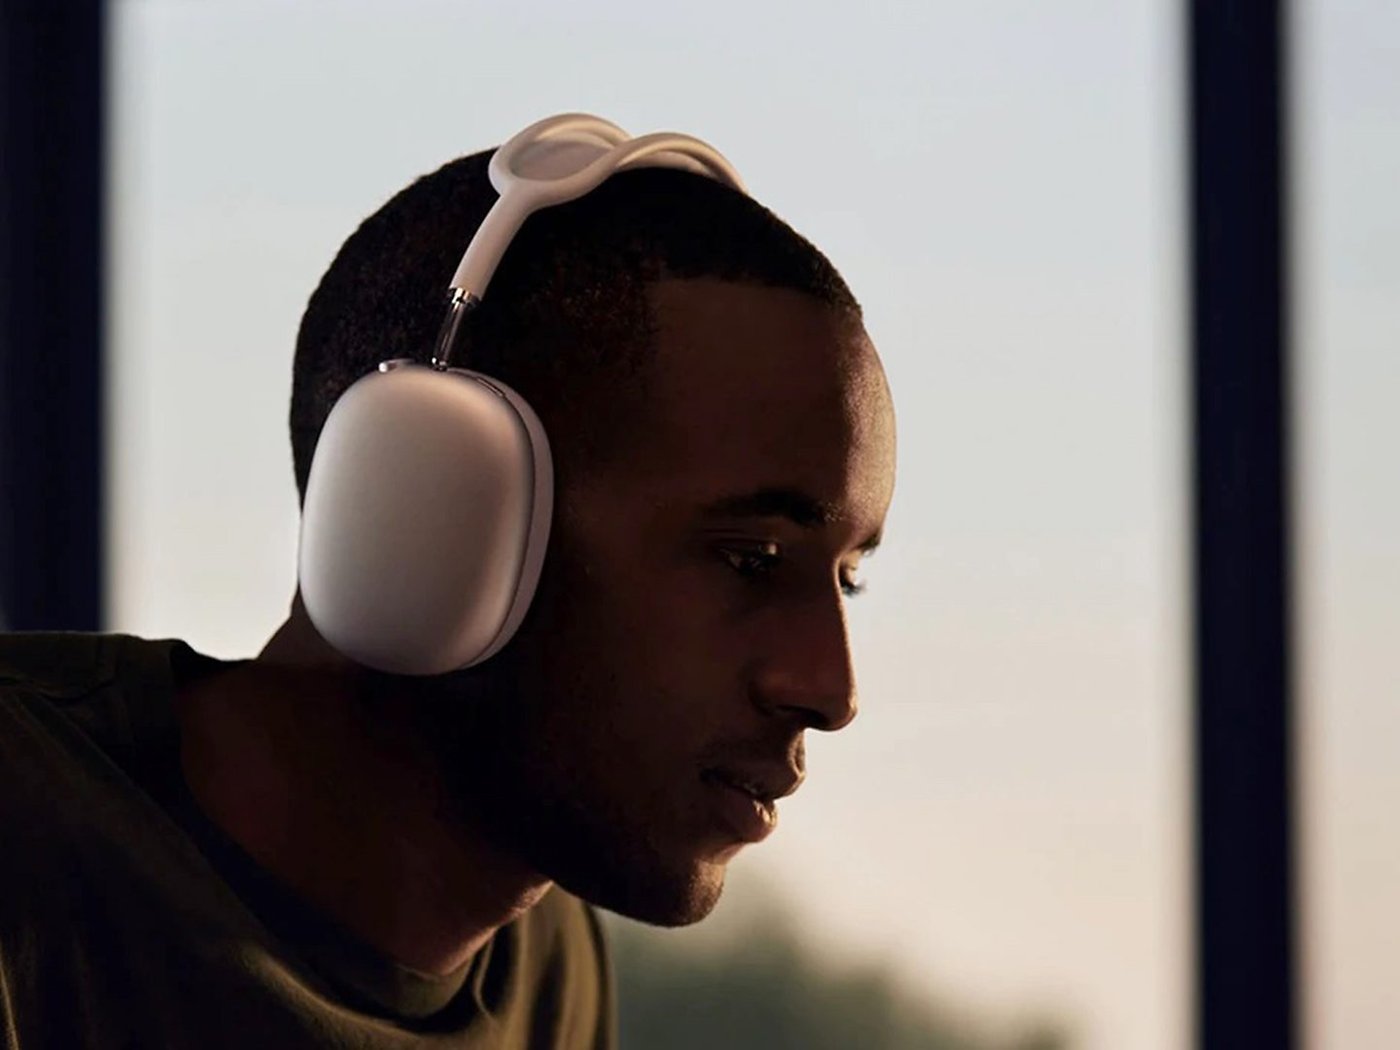 Apple AirPods Pro, AirPods Max headphones get Find My upgrade - CNET